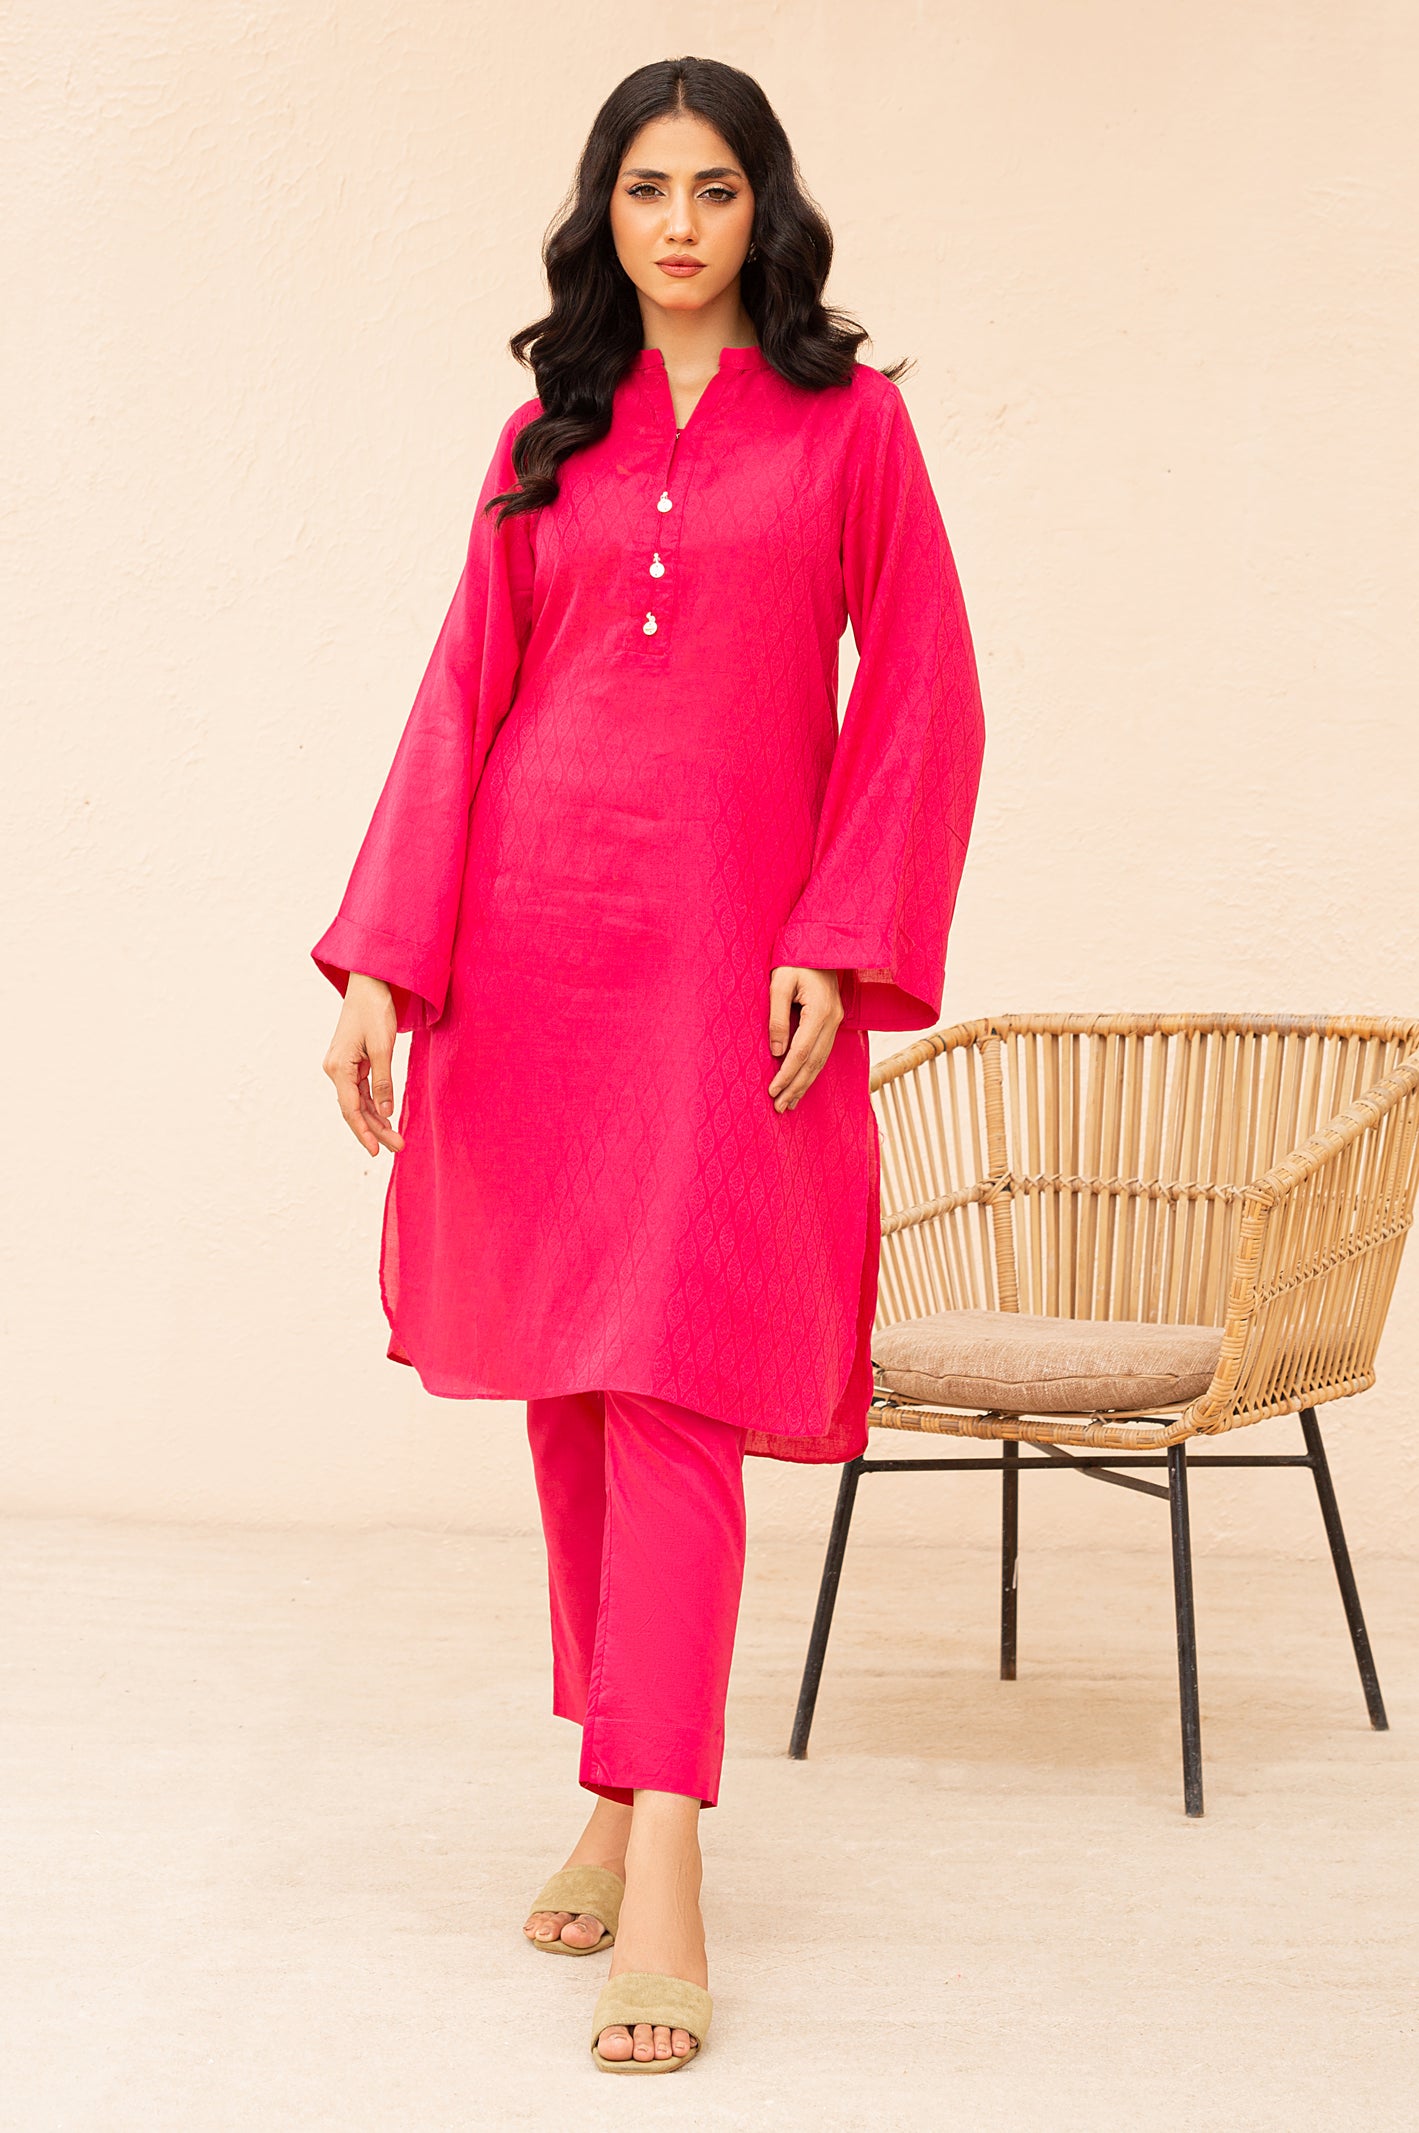 2PC Dark Pink Solid Suit From Diners